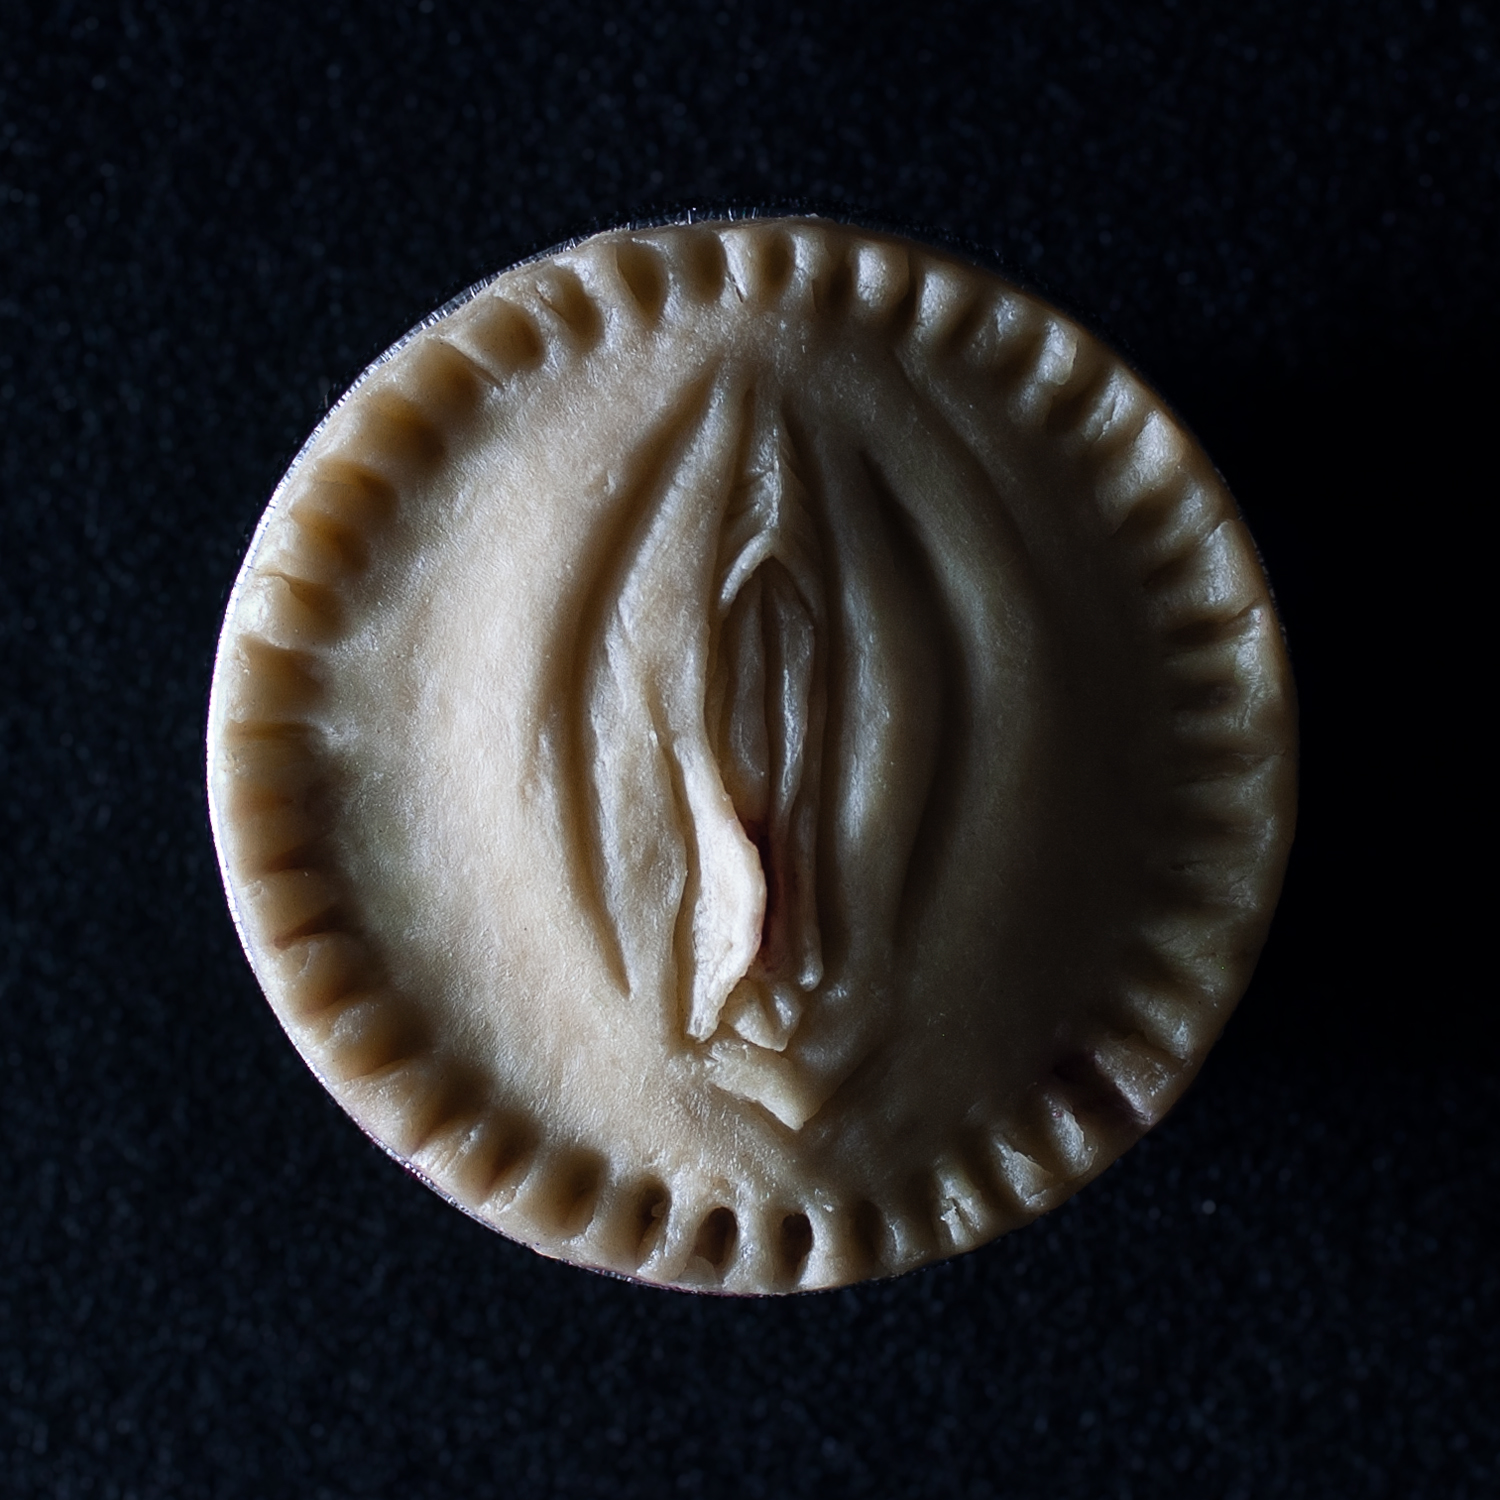 Pie 3, a pie sculpted to appear like a vulva